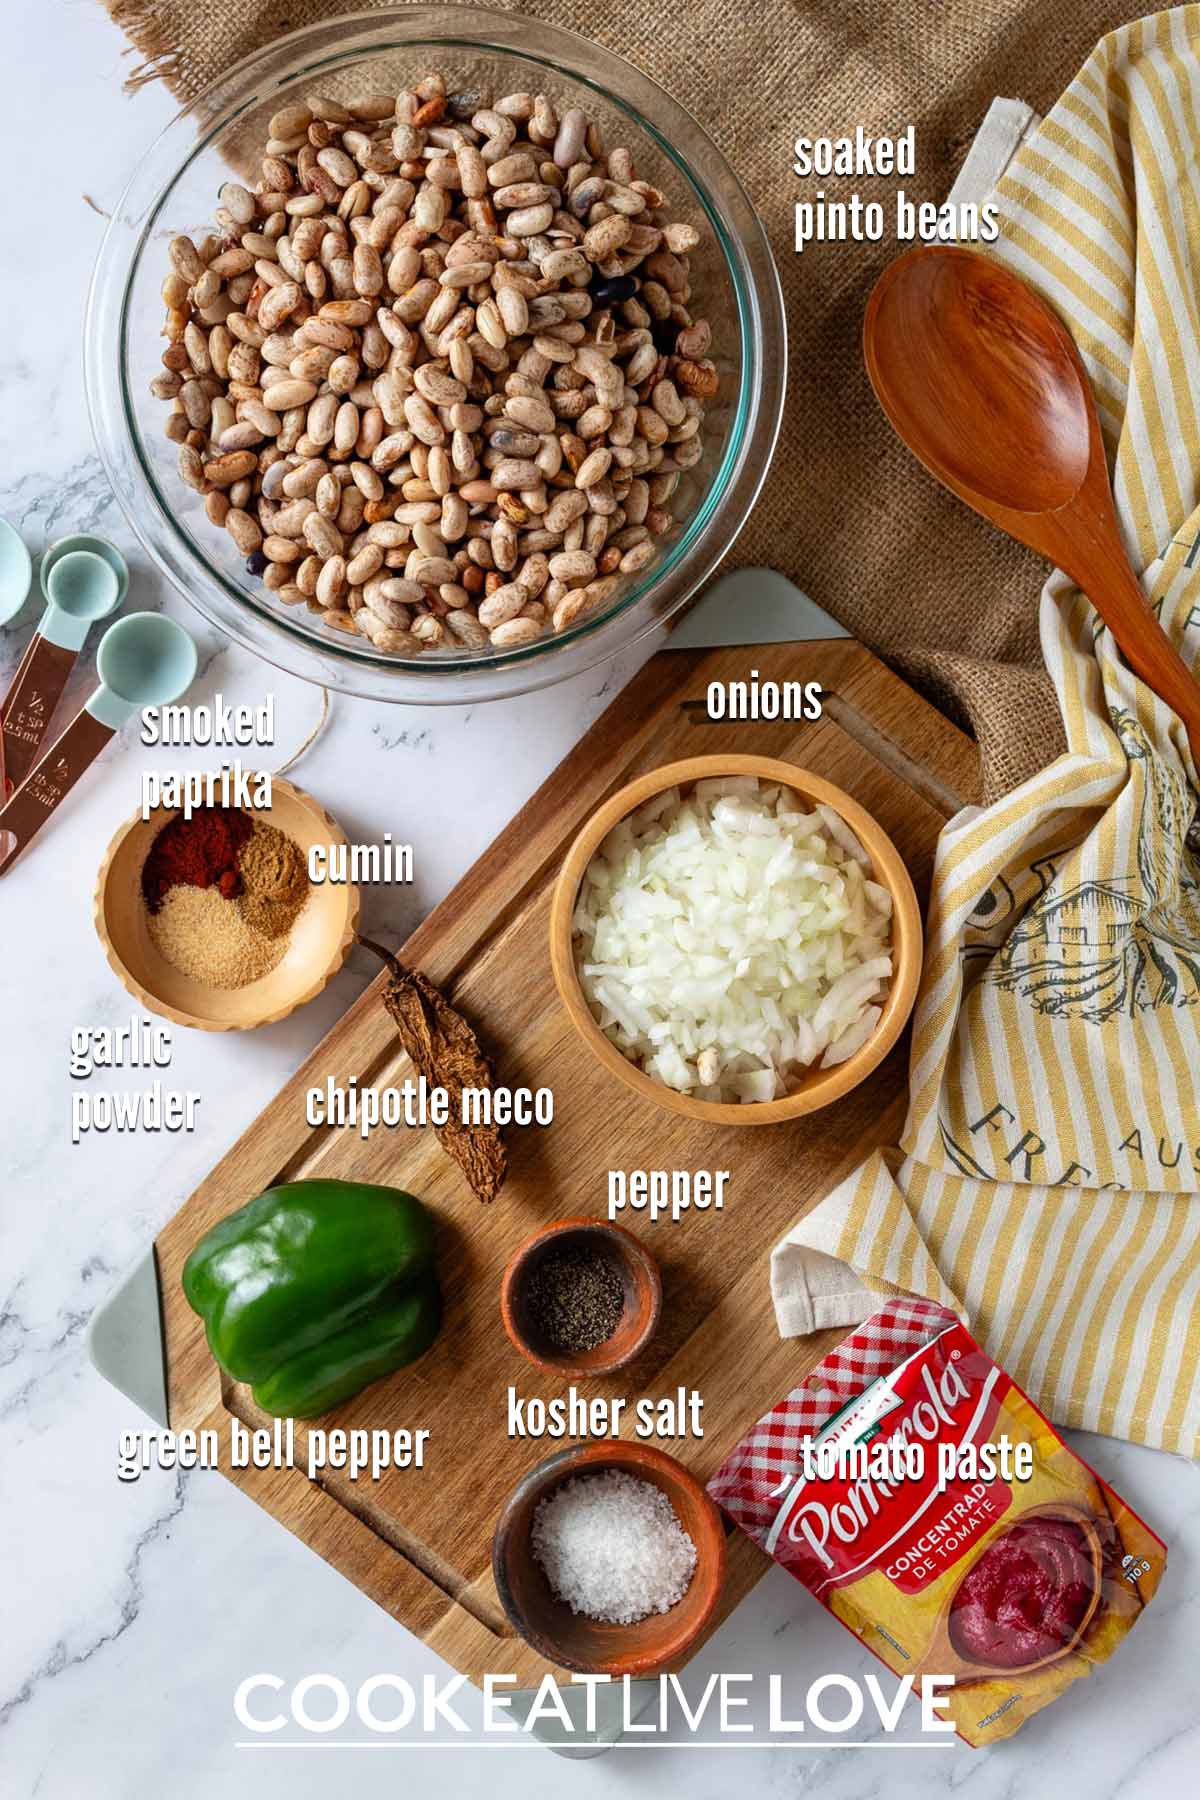 Ingredients to make slow cooker pinto beans on the table before cooking.